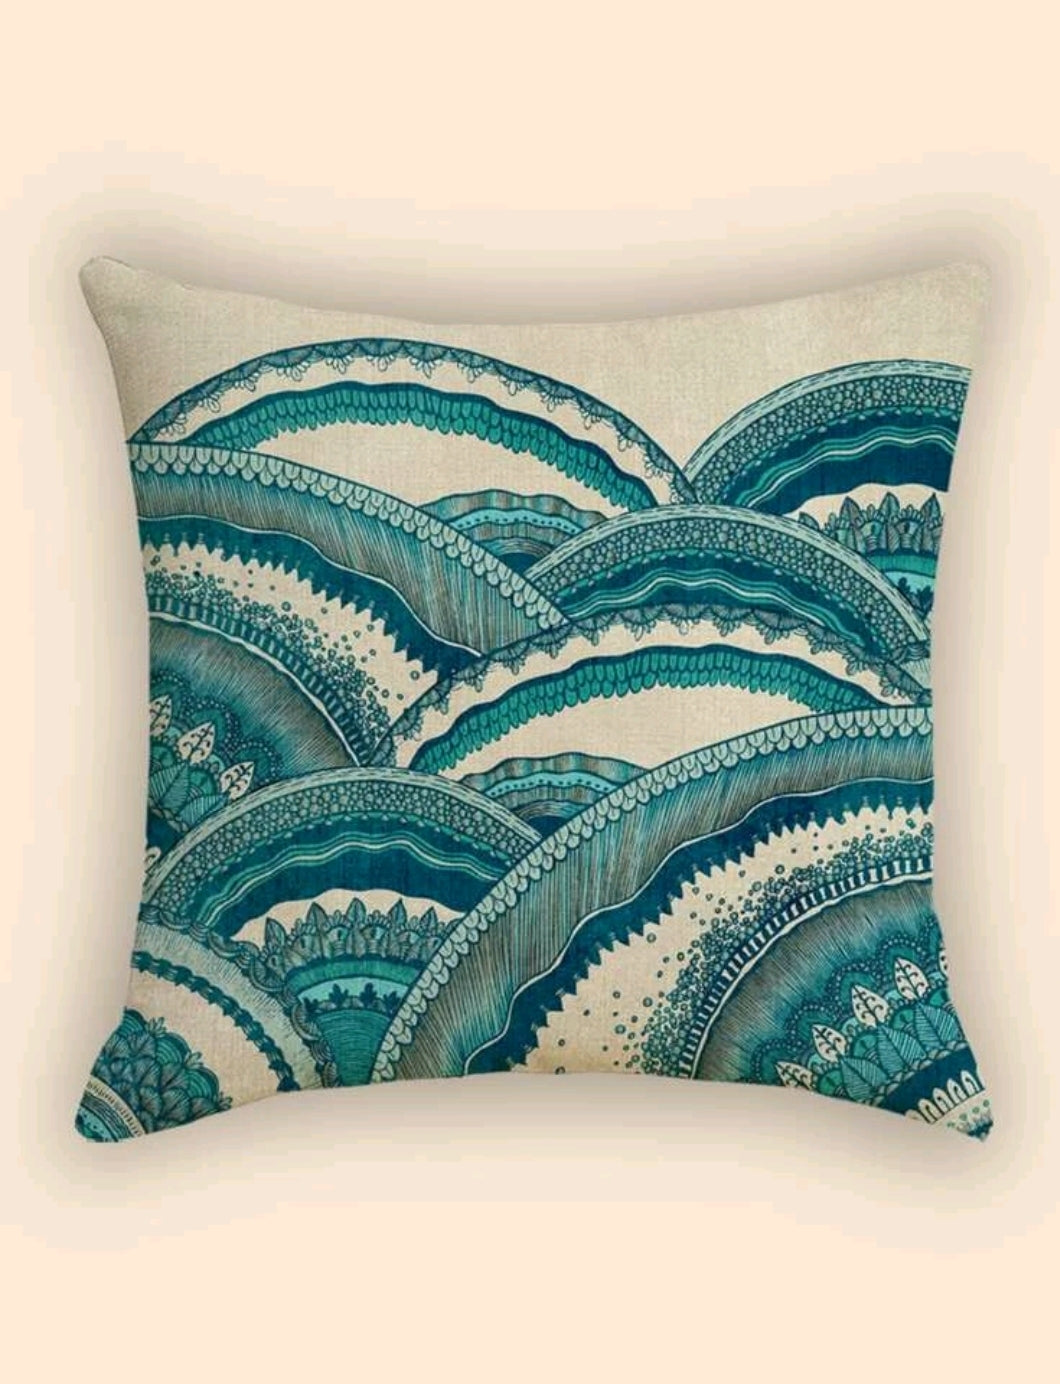  'Sea Wave Printed Cushion' Fancy summer and comfort? Choose this beautiful boho style cushion with summer designs that recall the colours of the sea! In shades of blue, fashionable and relaxing pillow! Perfect for sofa, beds and armchairs. Gift idea for home décor lovers.      Material: 100% Polyester     Size: Length 45cm/17.7inch Width 45cm/17.7inch     Color: Multicolour (Blue tones)     Pattern Type: Graphic     Type: Pillowcase     No filler included